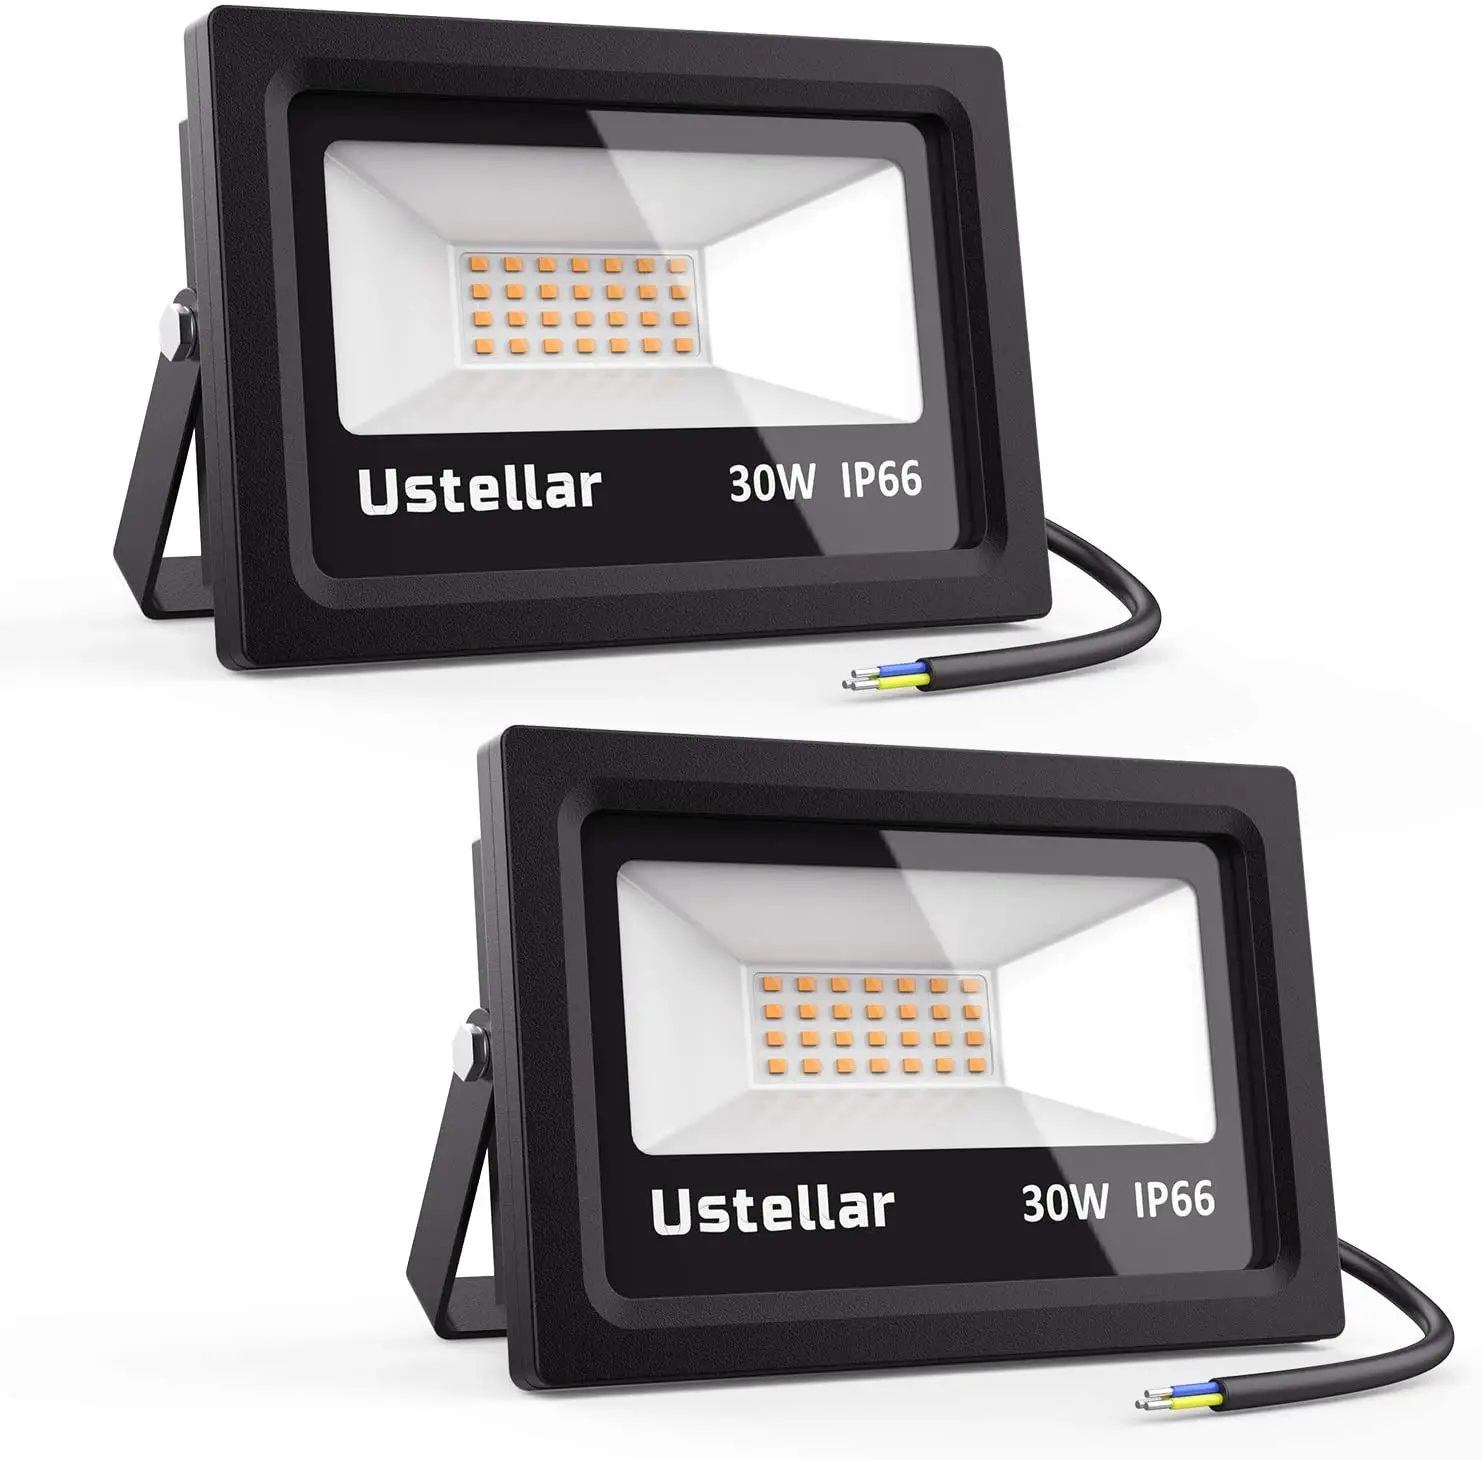 2Pack 30W Warm White LED Flood Light,150W Halogen Bulb Equivalent Outdoor Super Bright Security Lights